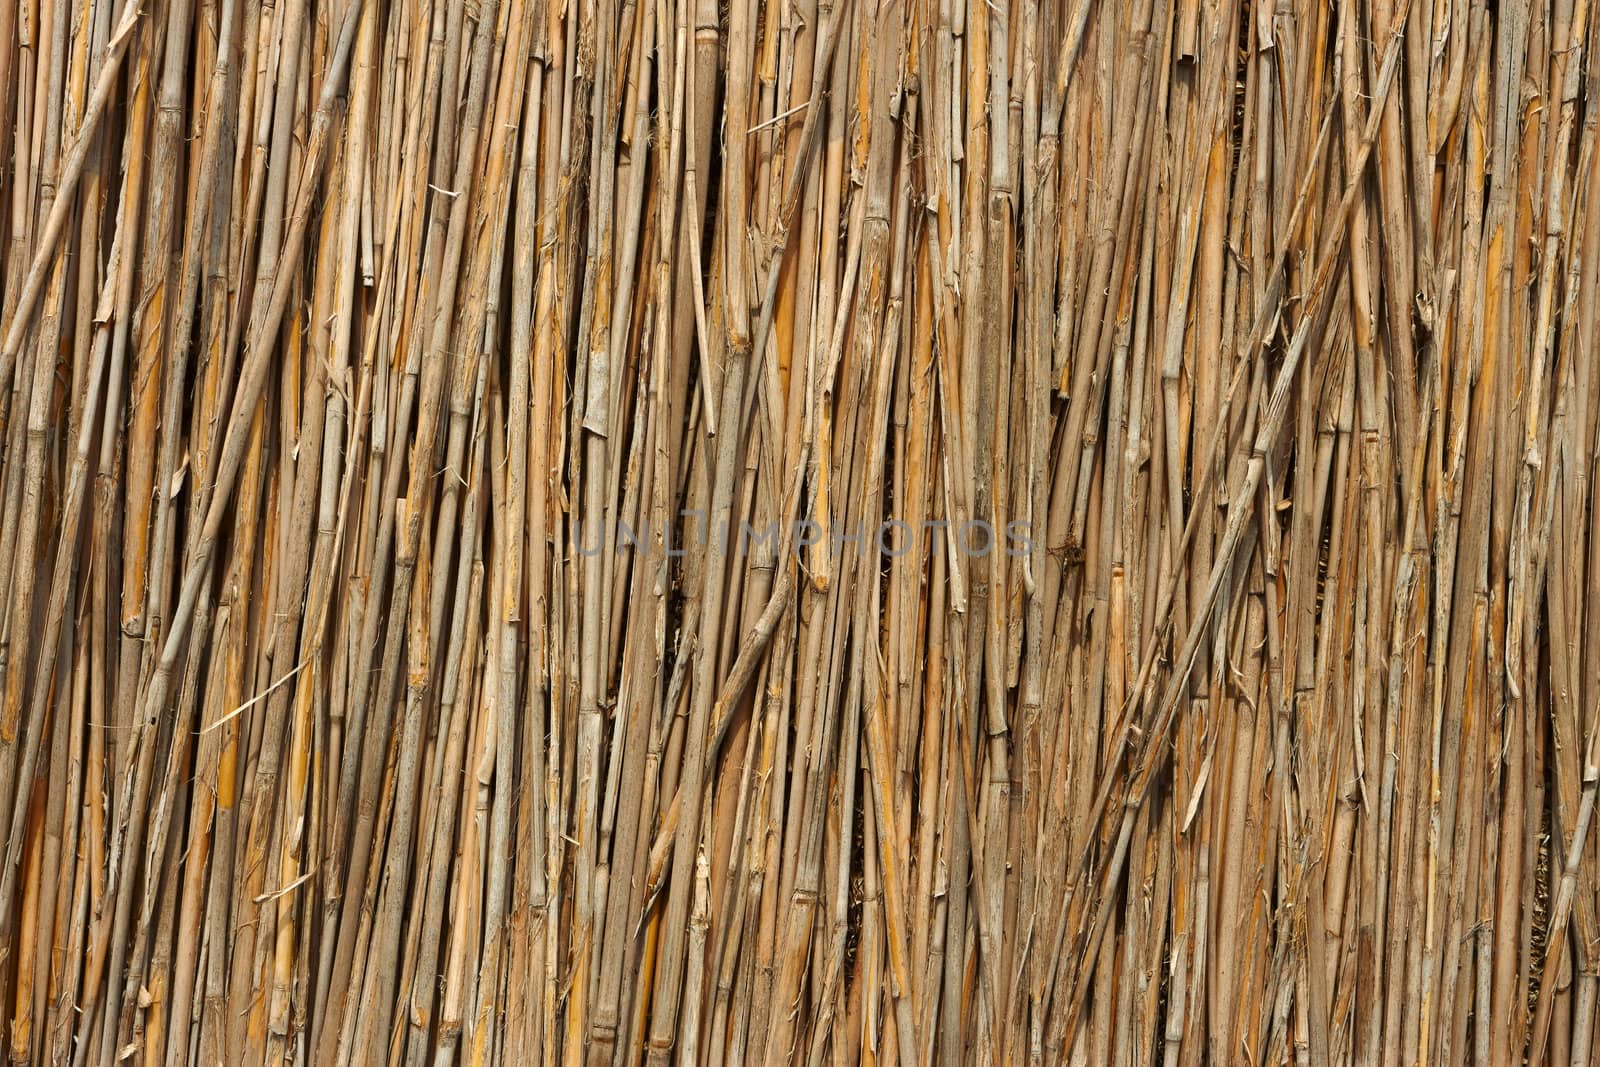 Fragment of reed fence by qiiip